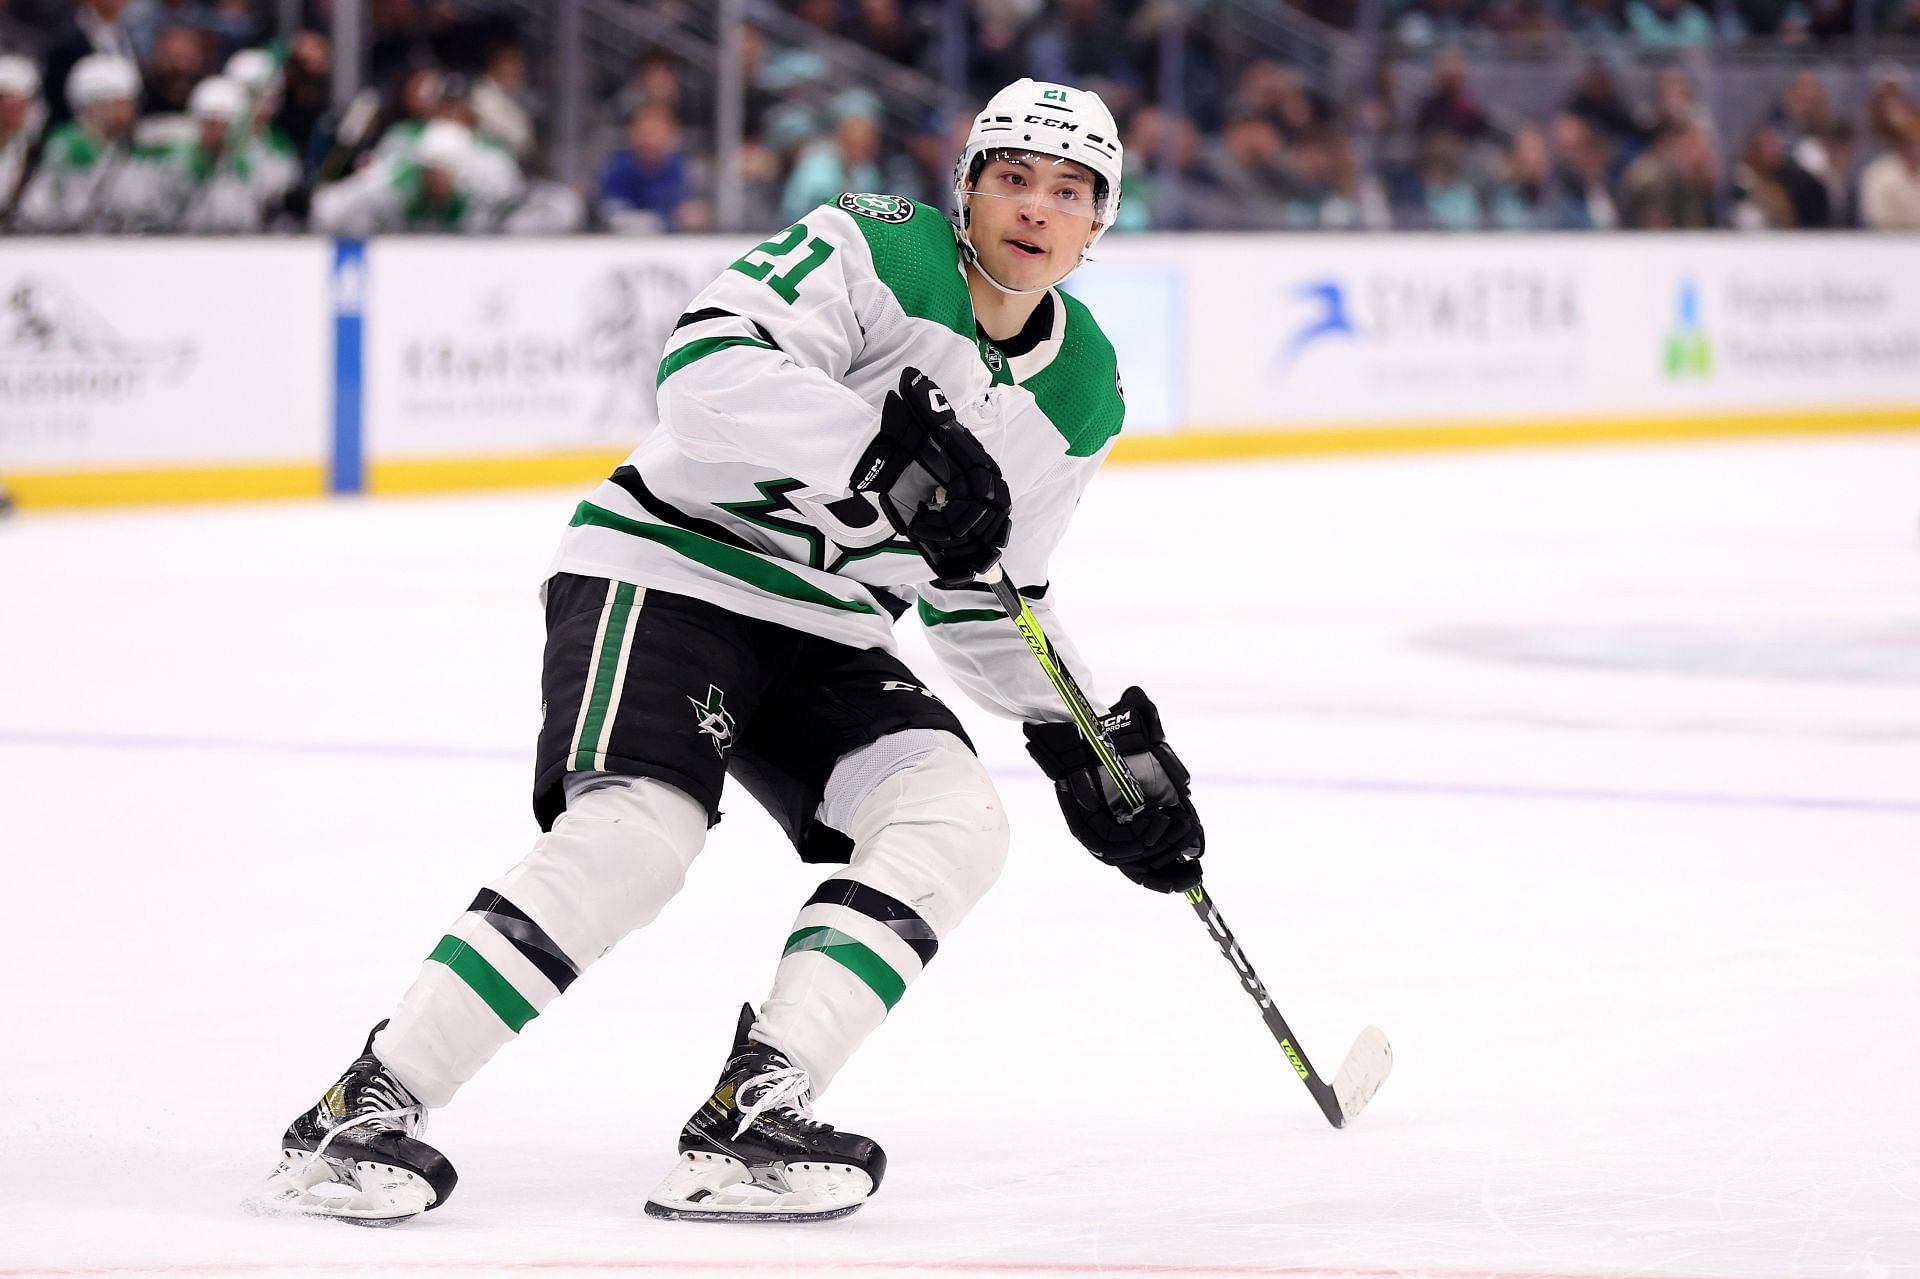 Filipino American Jason Robertson Is the Breakout Star of the NHL